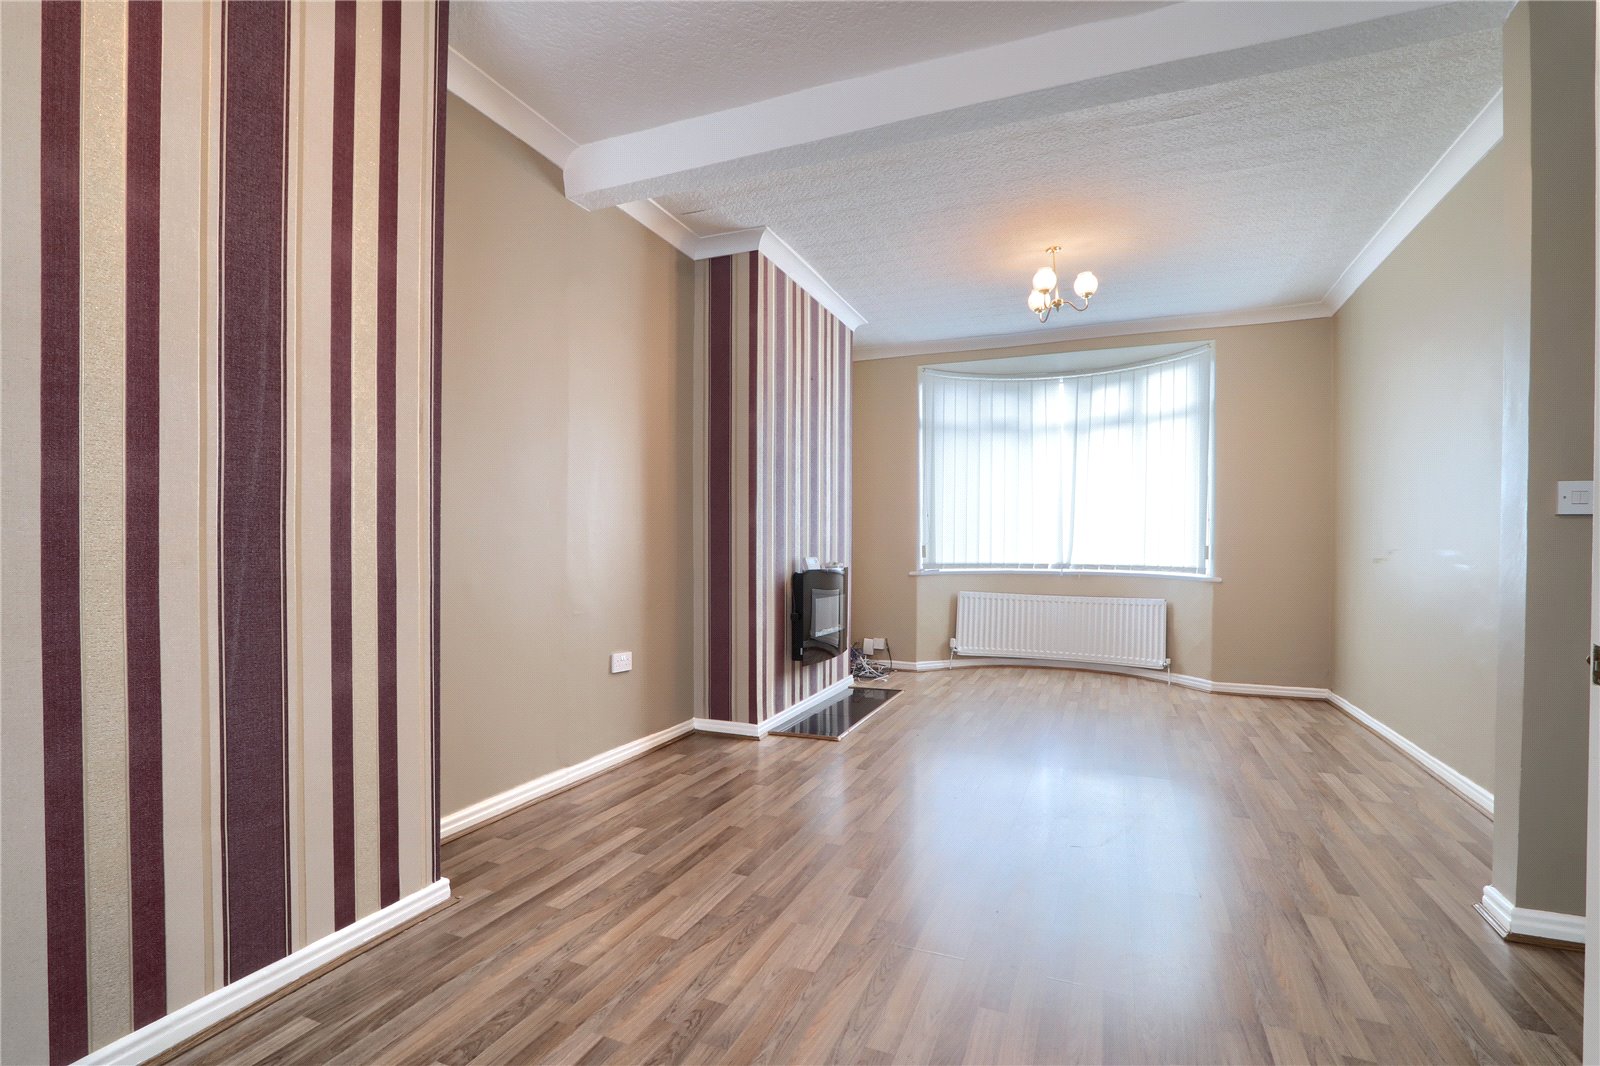 3 bed house for sale in Richardson Road, Stockton-on-Tees 2